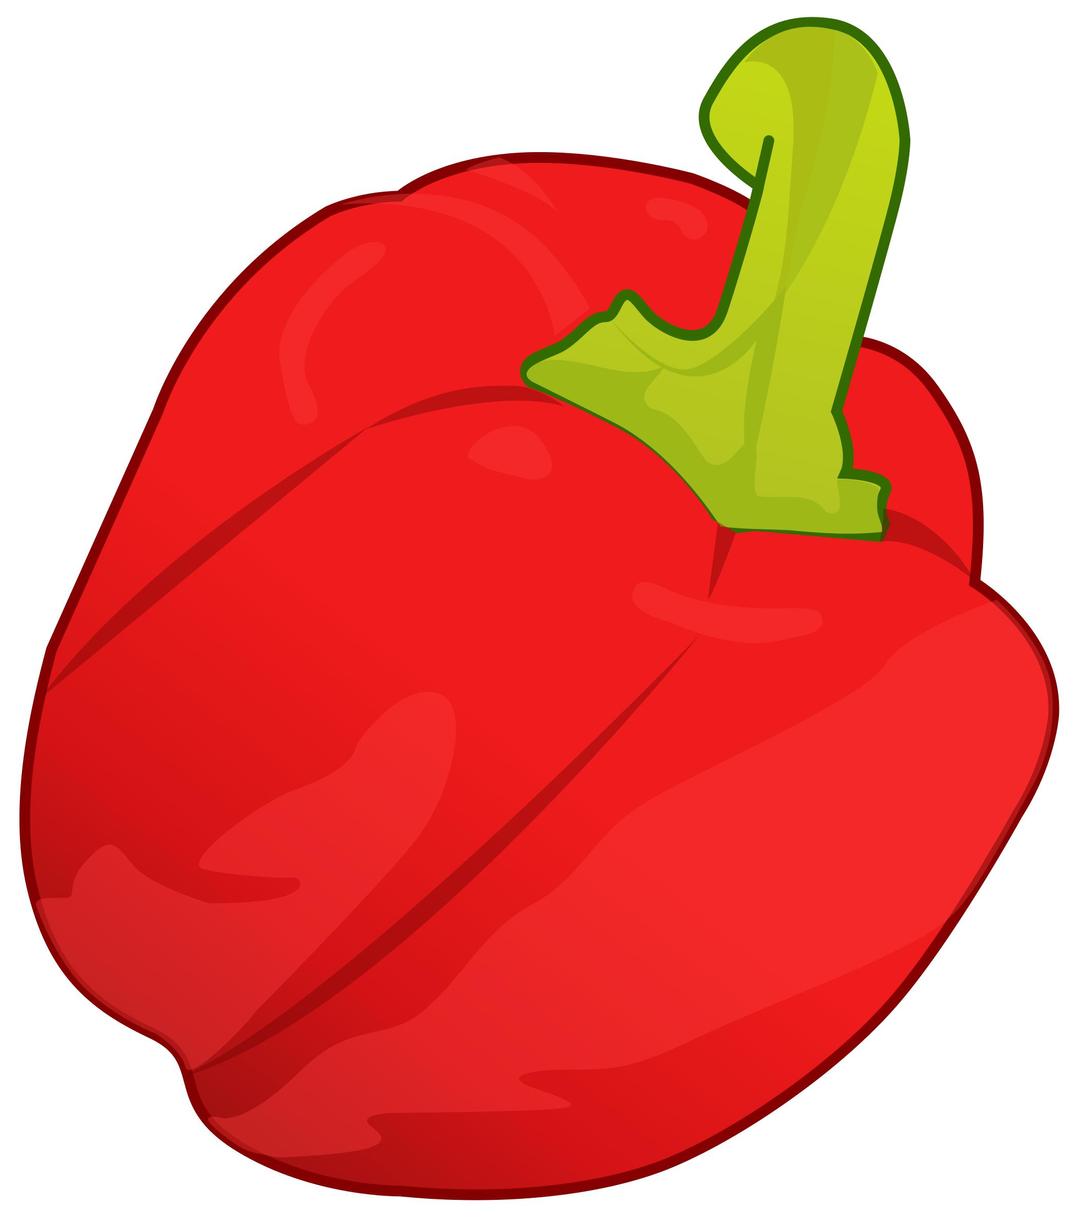 Red pepper png transparent